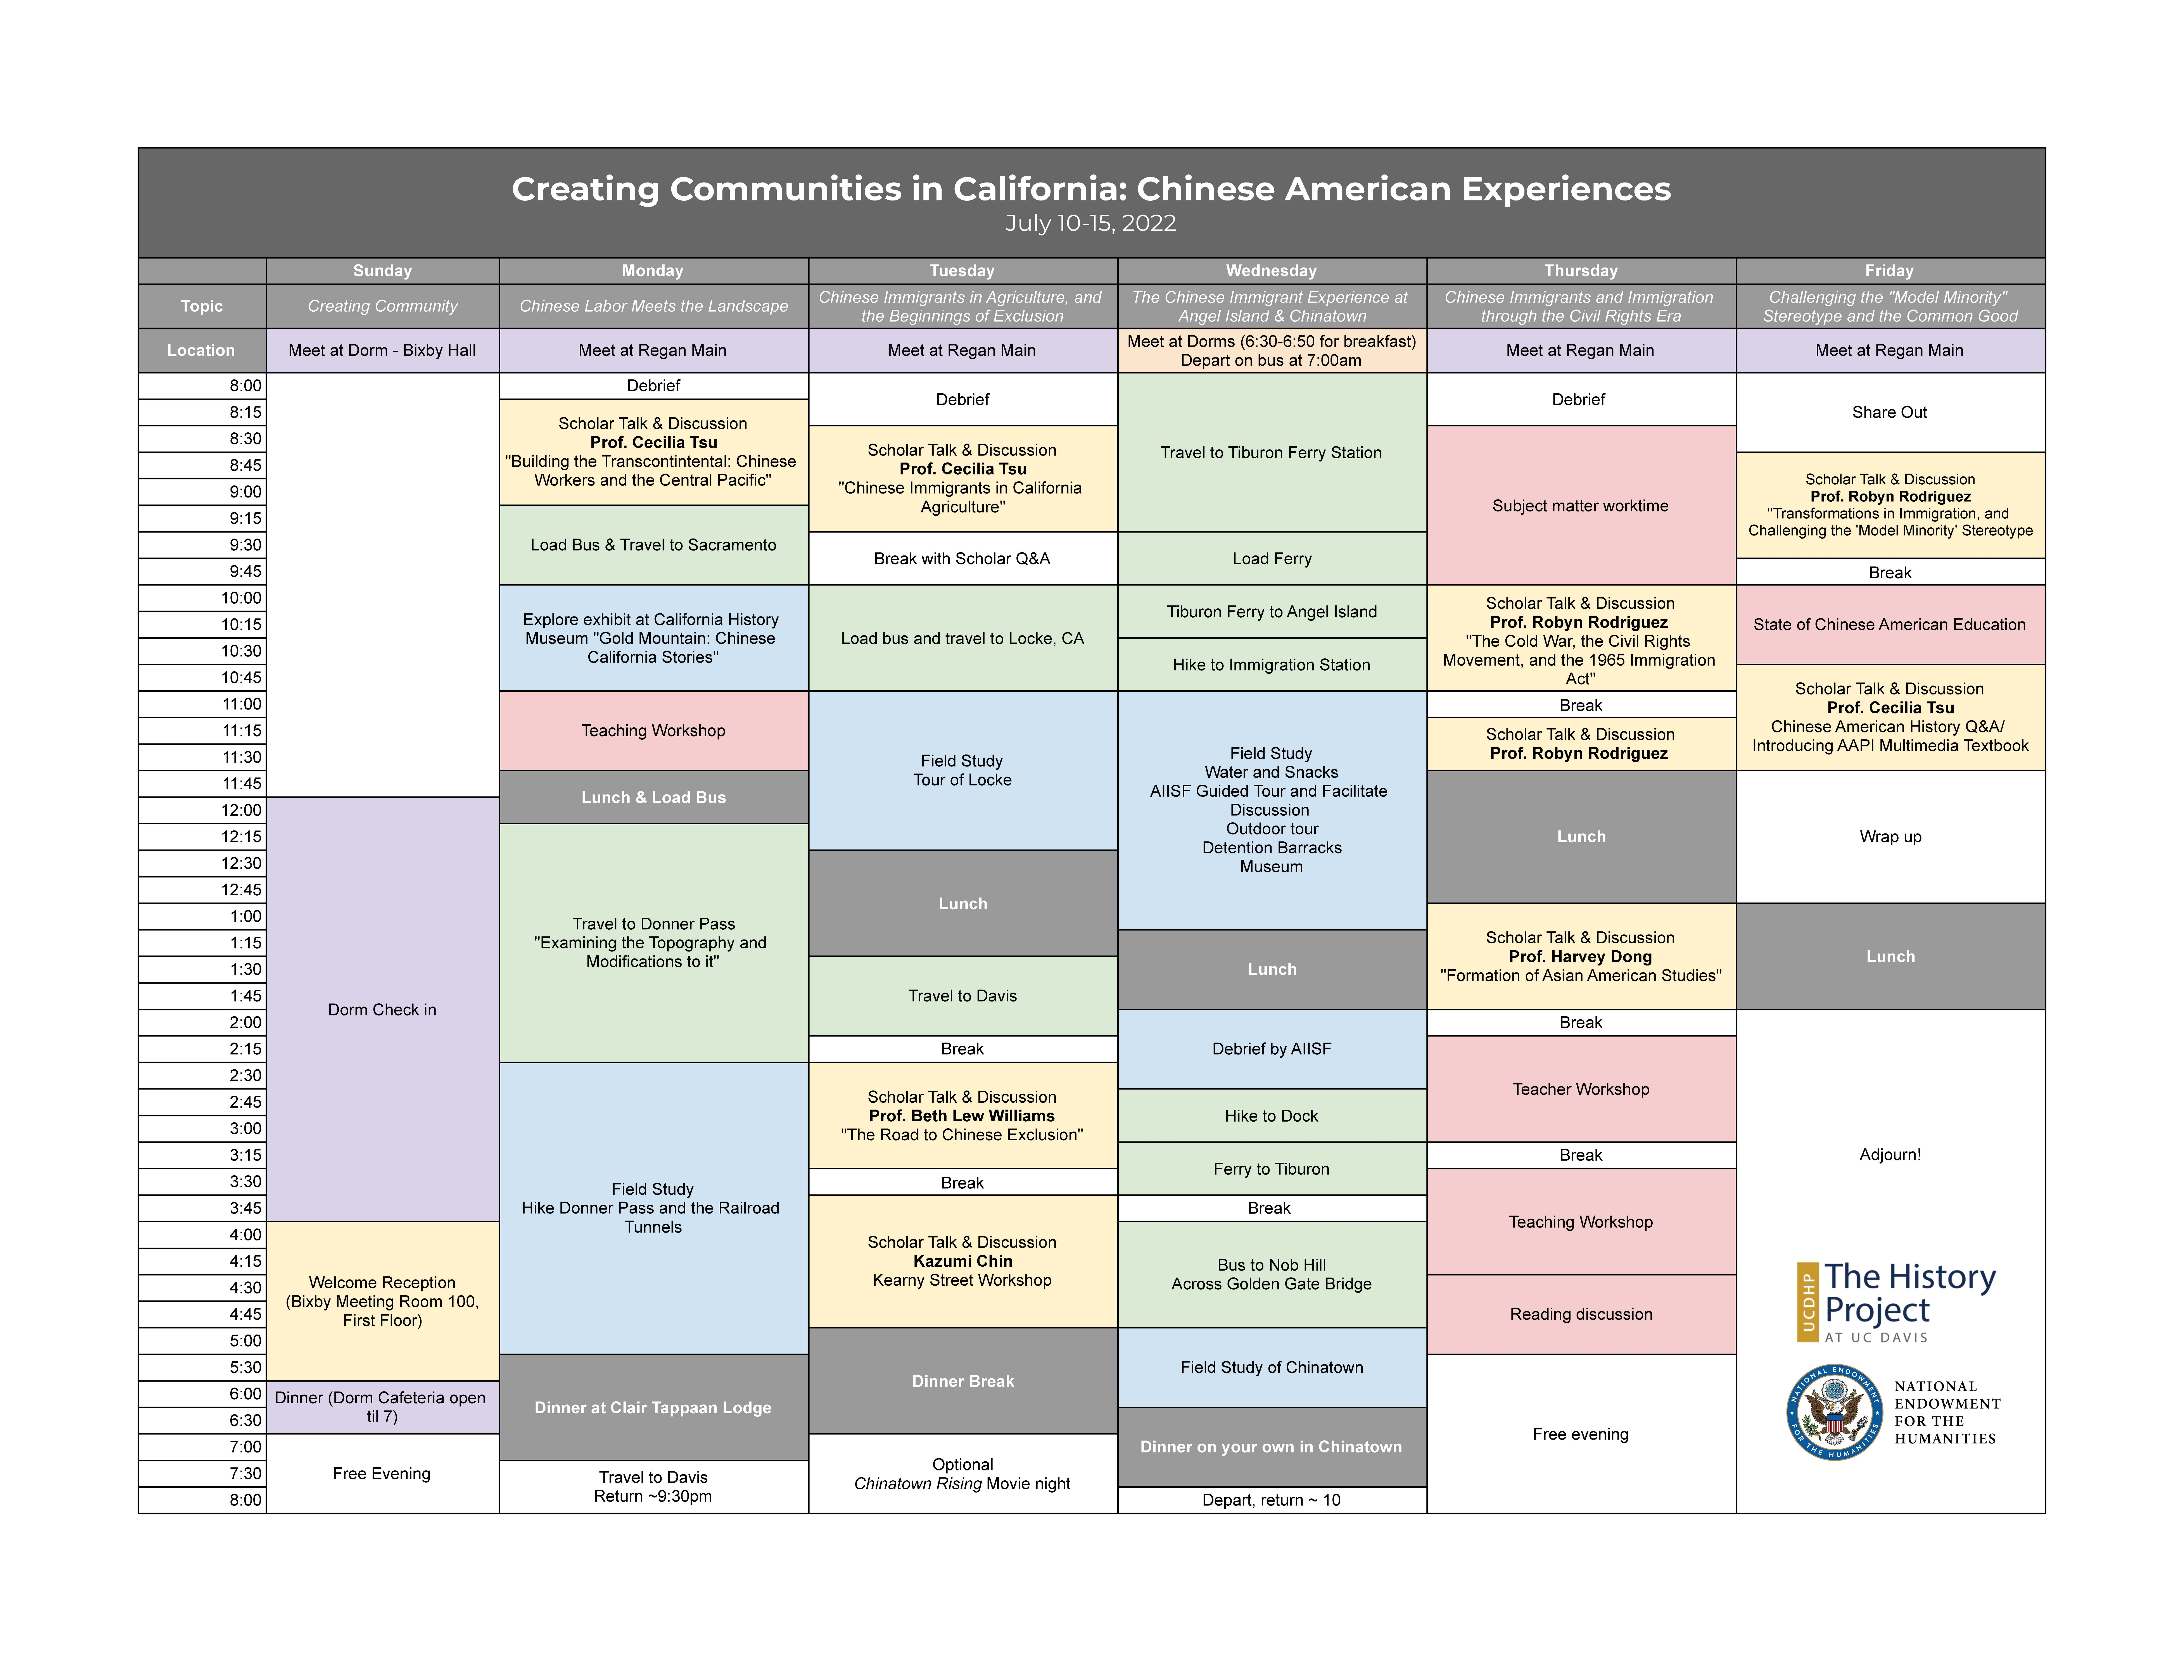 Image of the weekly schedule of activities for the Creating Communities workshop